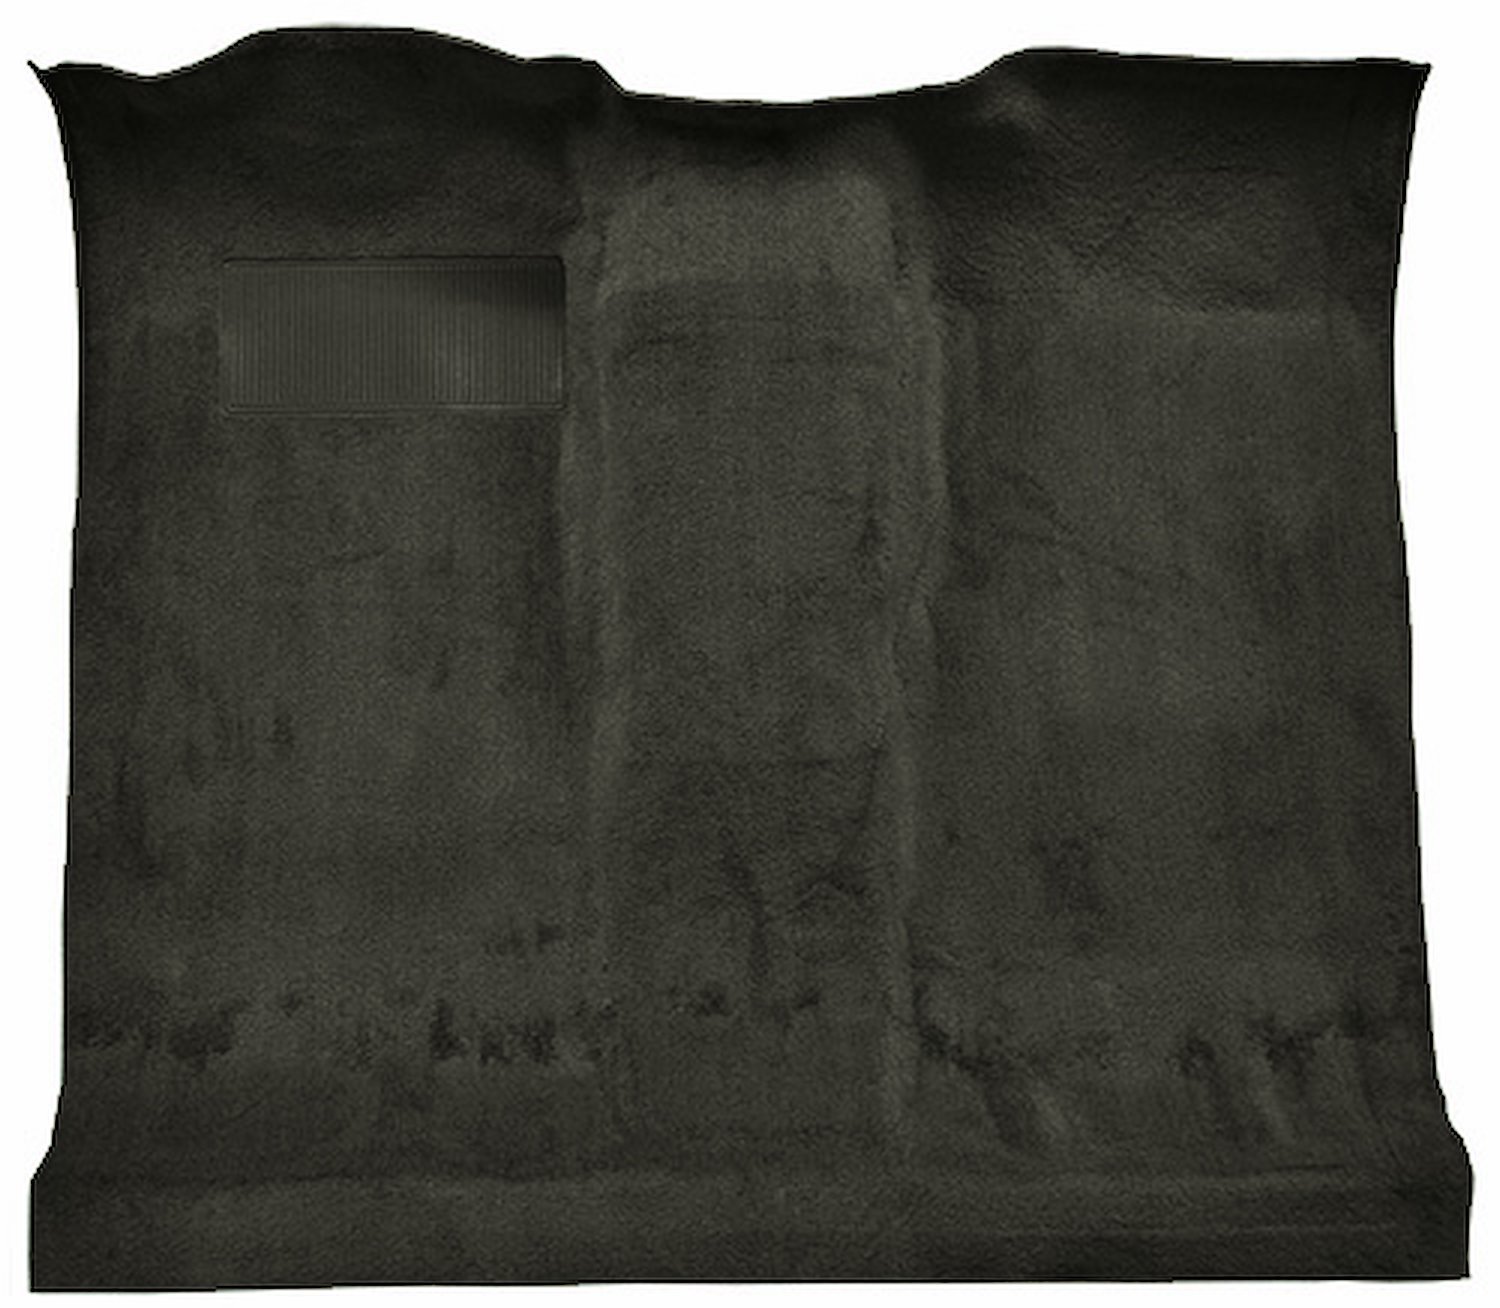 Molded Cut Pile Passenger Area Carpet for 1974-1977 Chevy Blazer, GMC Jimmy [Mass Backing, 1-Piece, Charcoal]